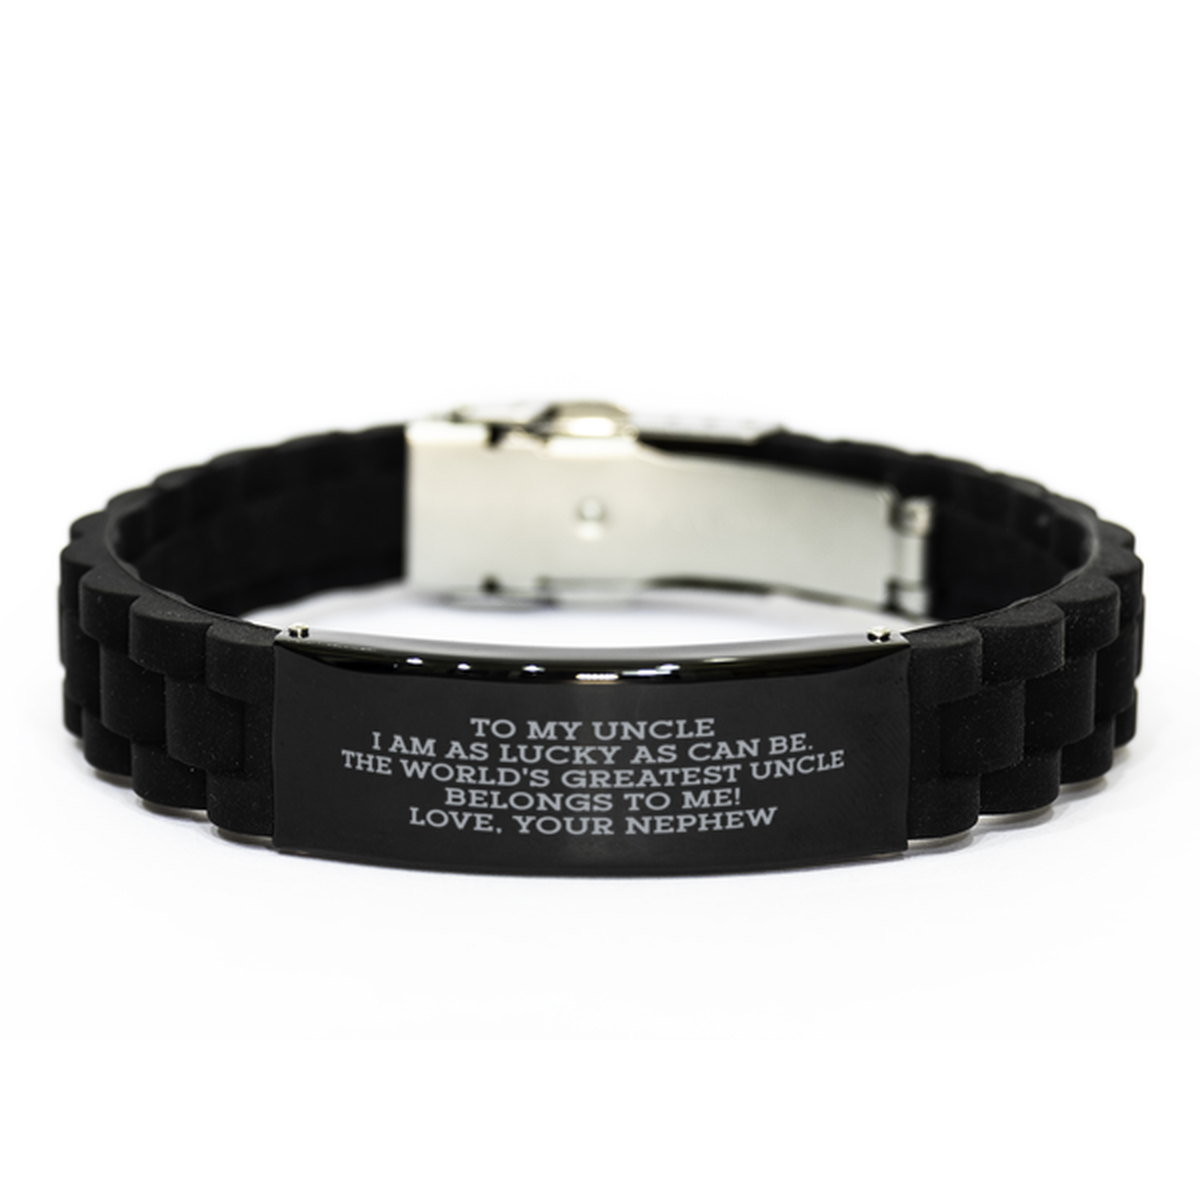 To My Uncle Black Bracelet, World's Greatest Uncle Belongs To Me, Fathers Day Gifts For Uncle From Nephew, Birthday Gifts For Men